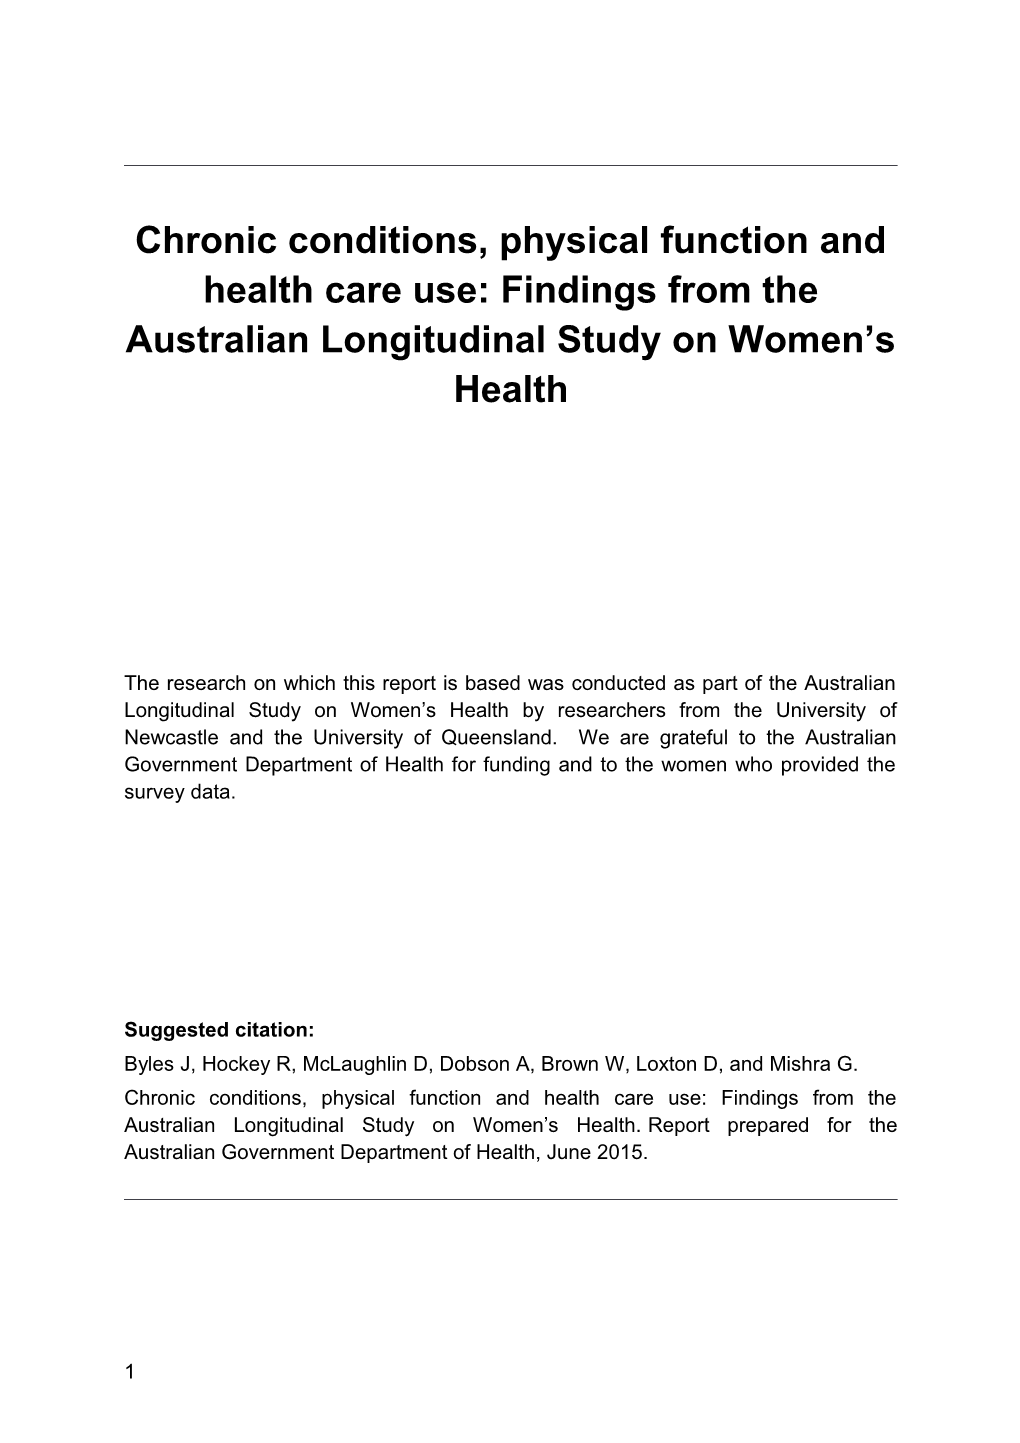 Chronic Conditions, Physical Function and Health Care Use: Findings from the Australian